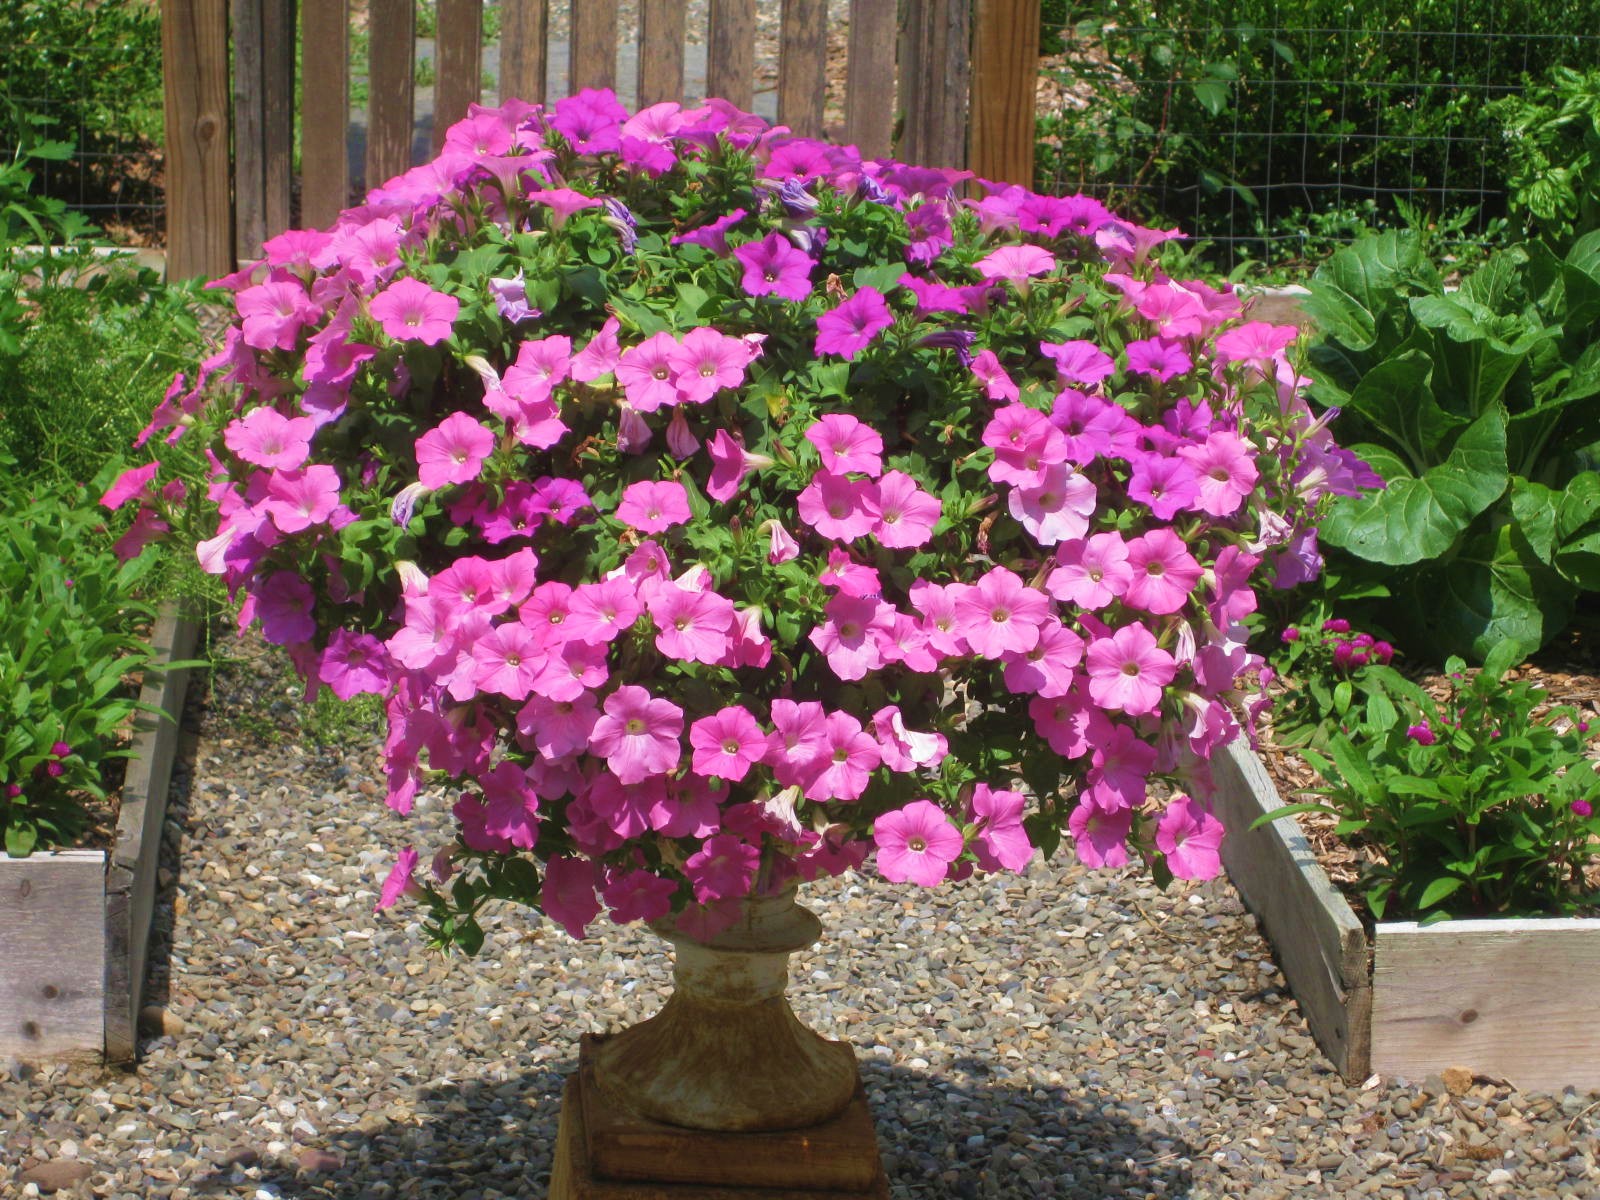 How To Propagate Petunias, Wax Begonias & Impatiens for Winter Bloom Indoors